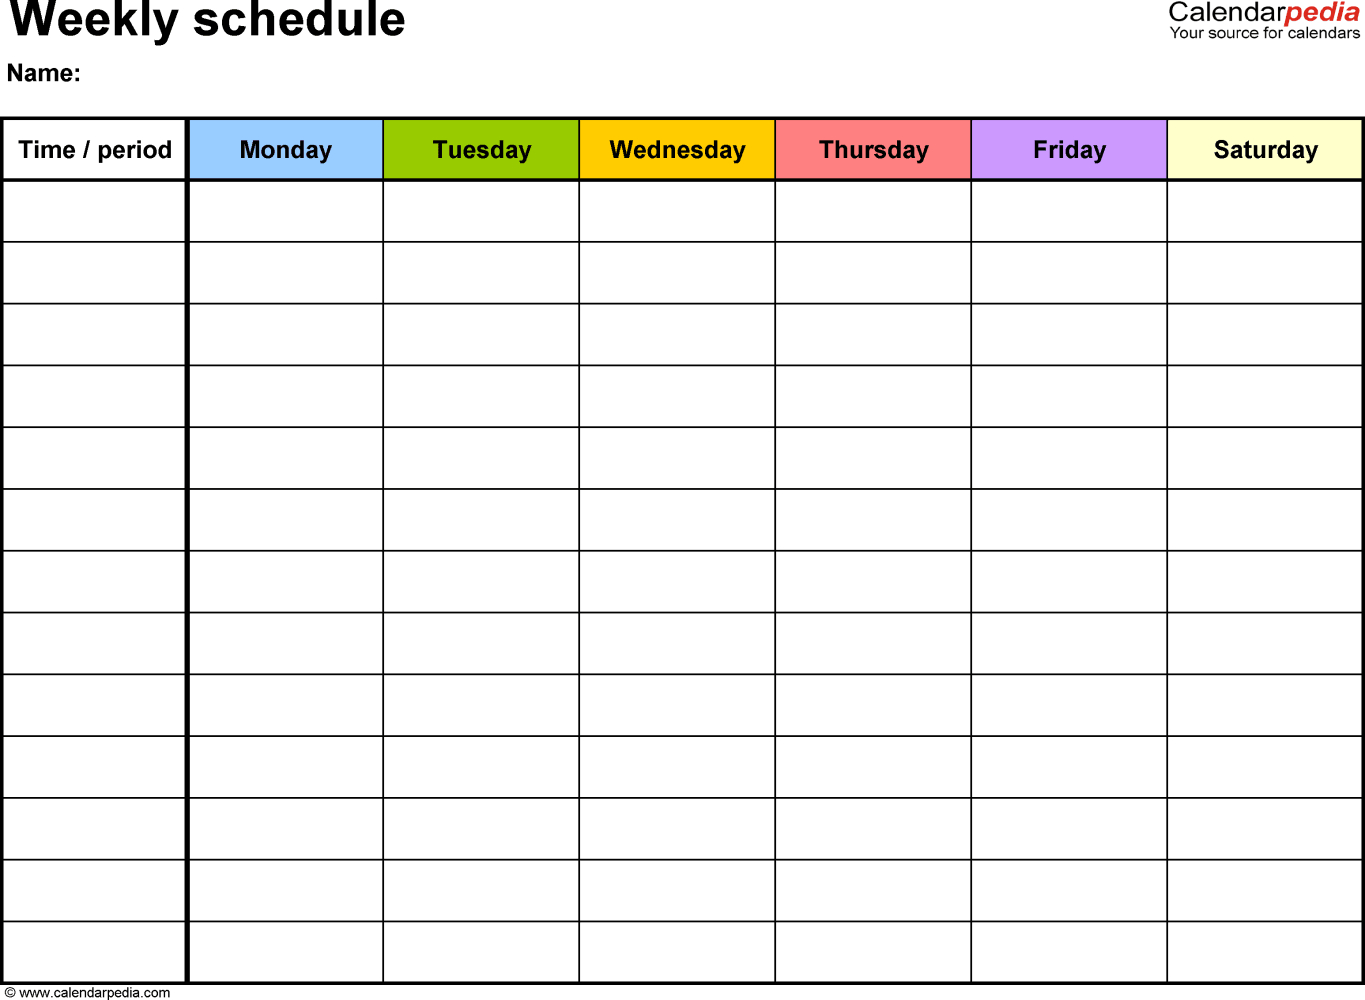 Free Weekly Schedule Templates For Excel - 18 Templates With Blank Spreadsheets